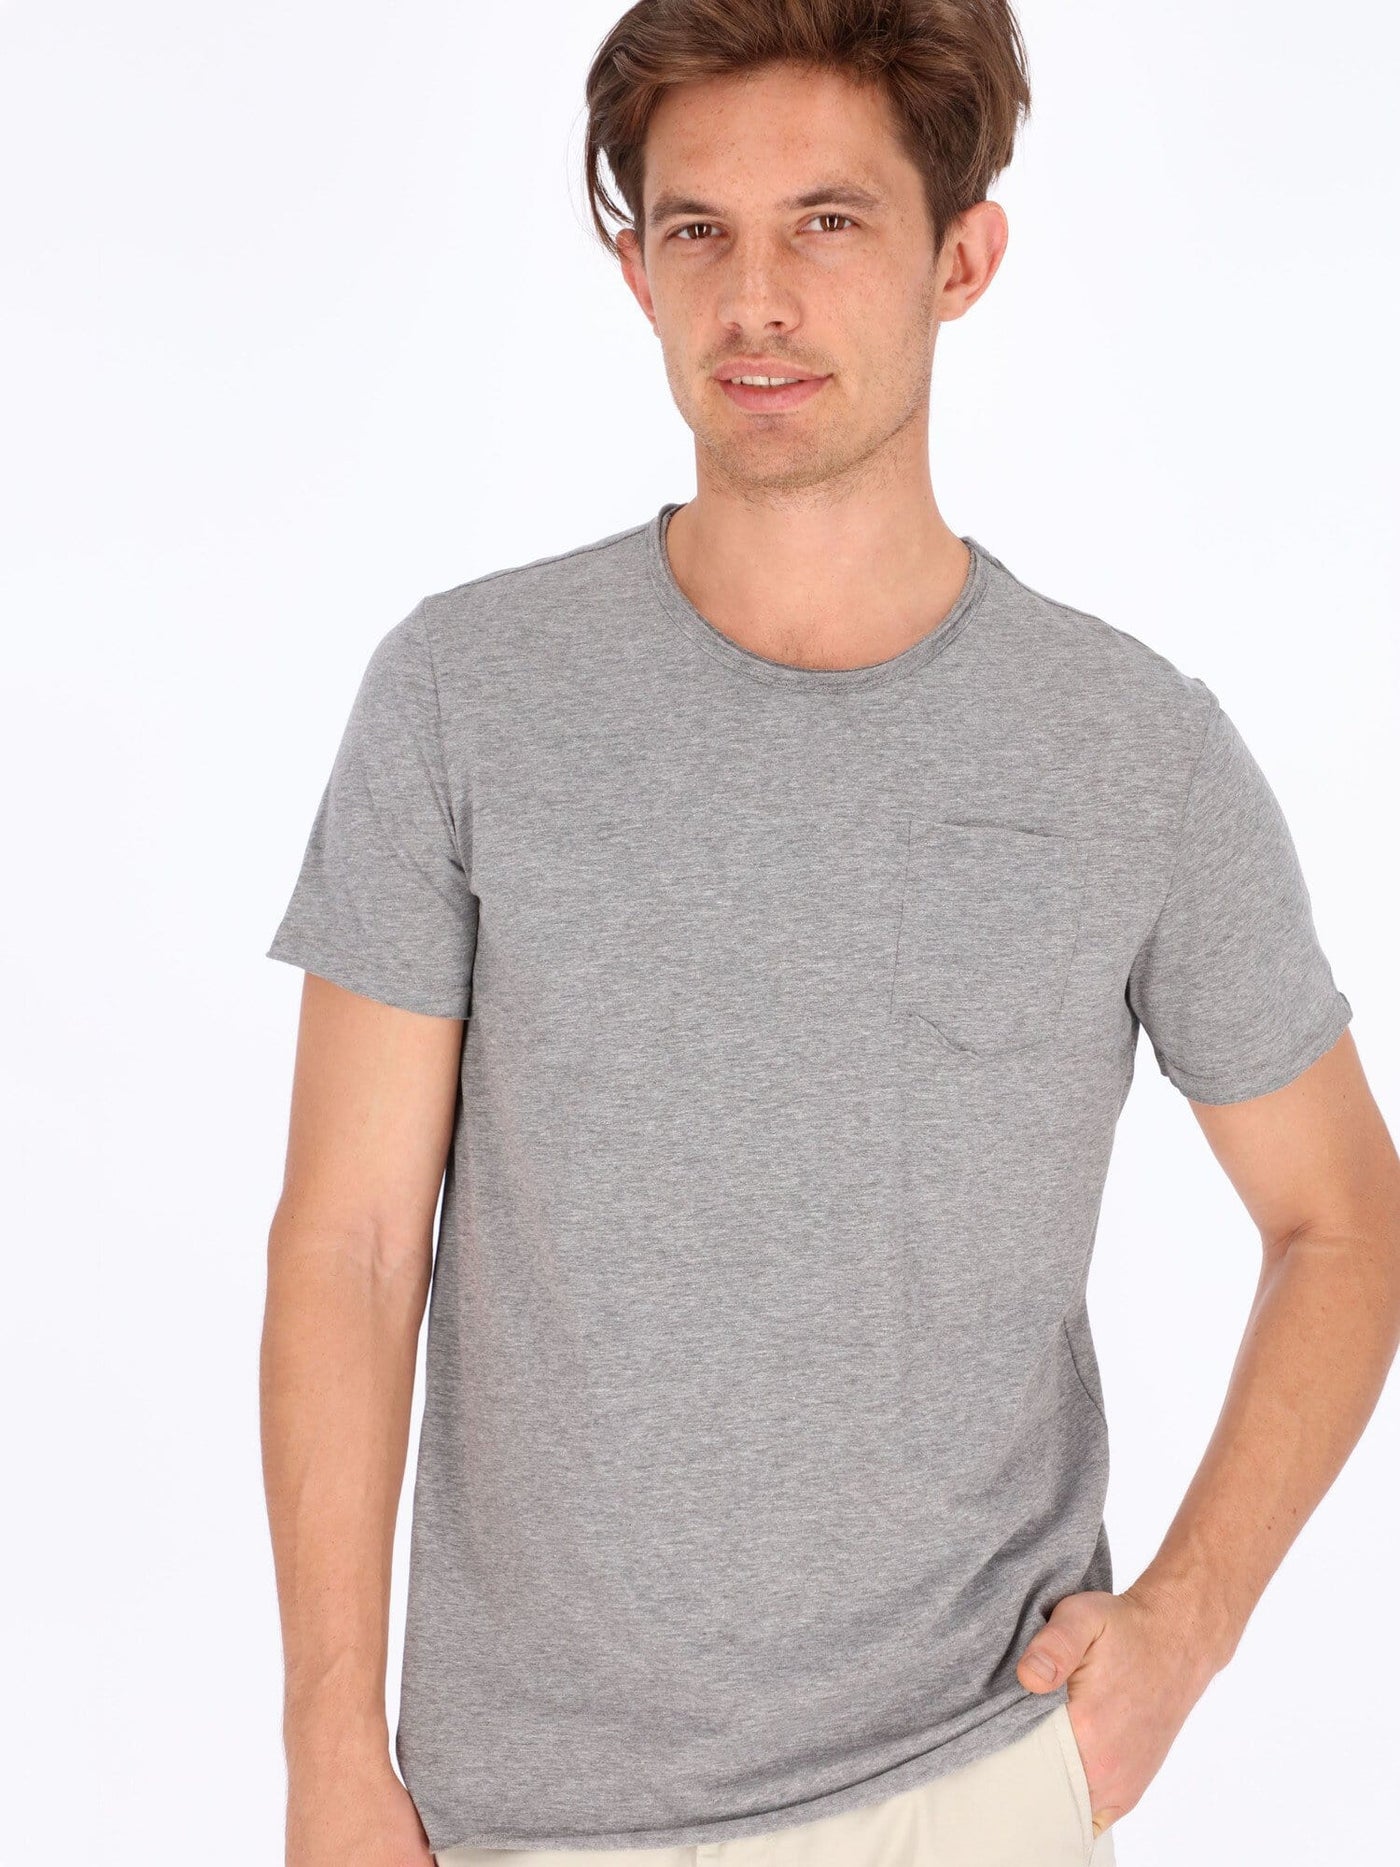 OR T-Shirts Heather Grey / S Round Neck Chest Pocket T-Shirt